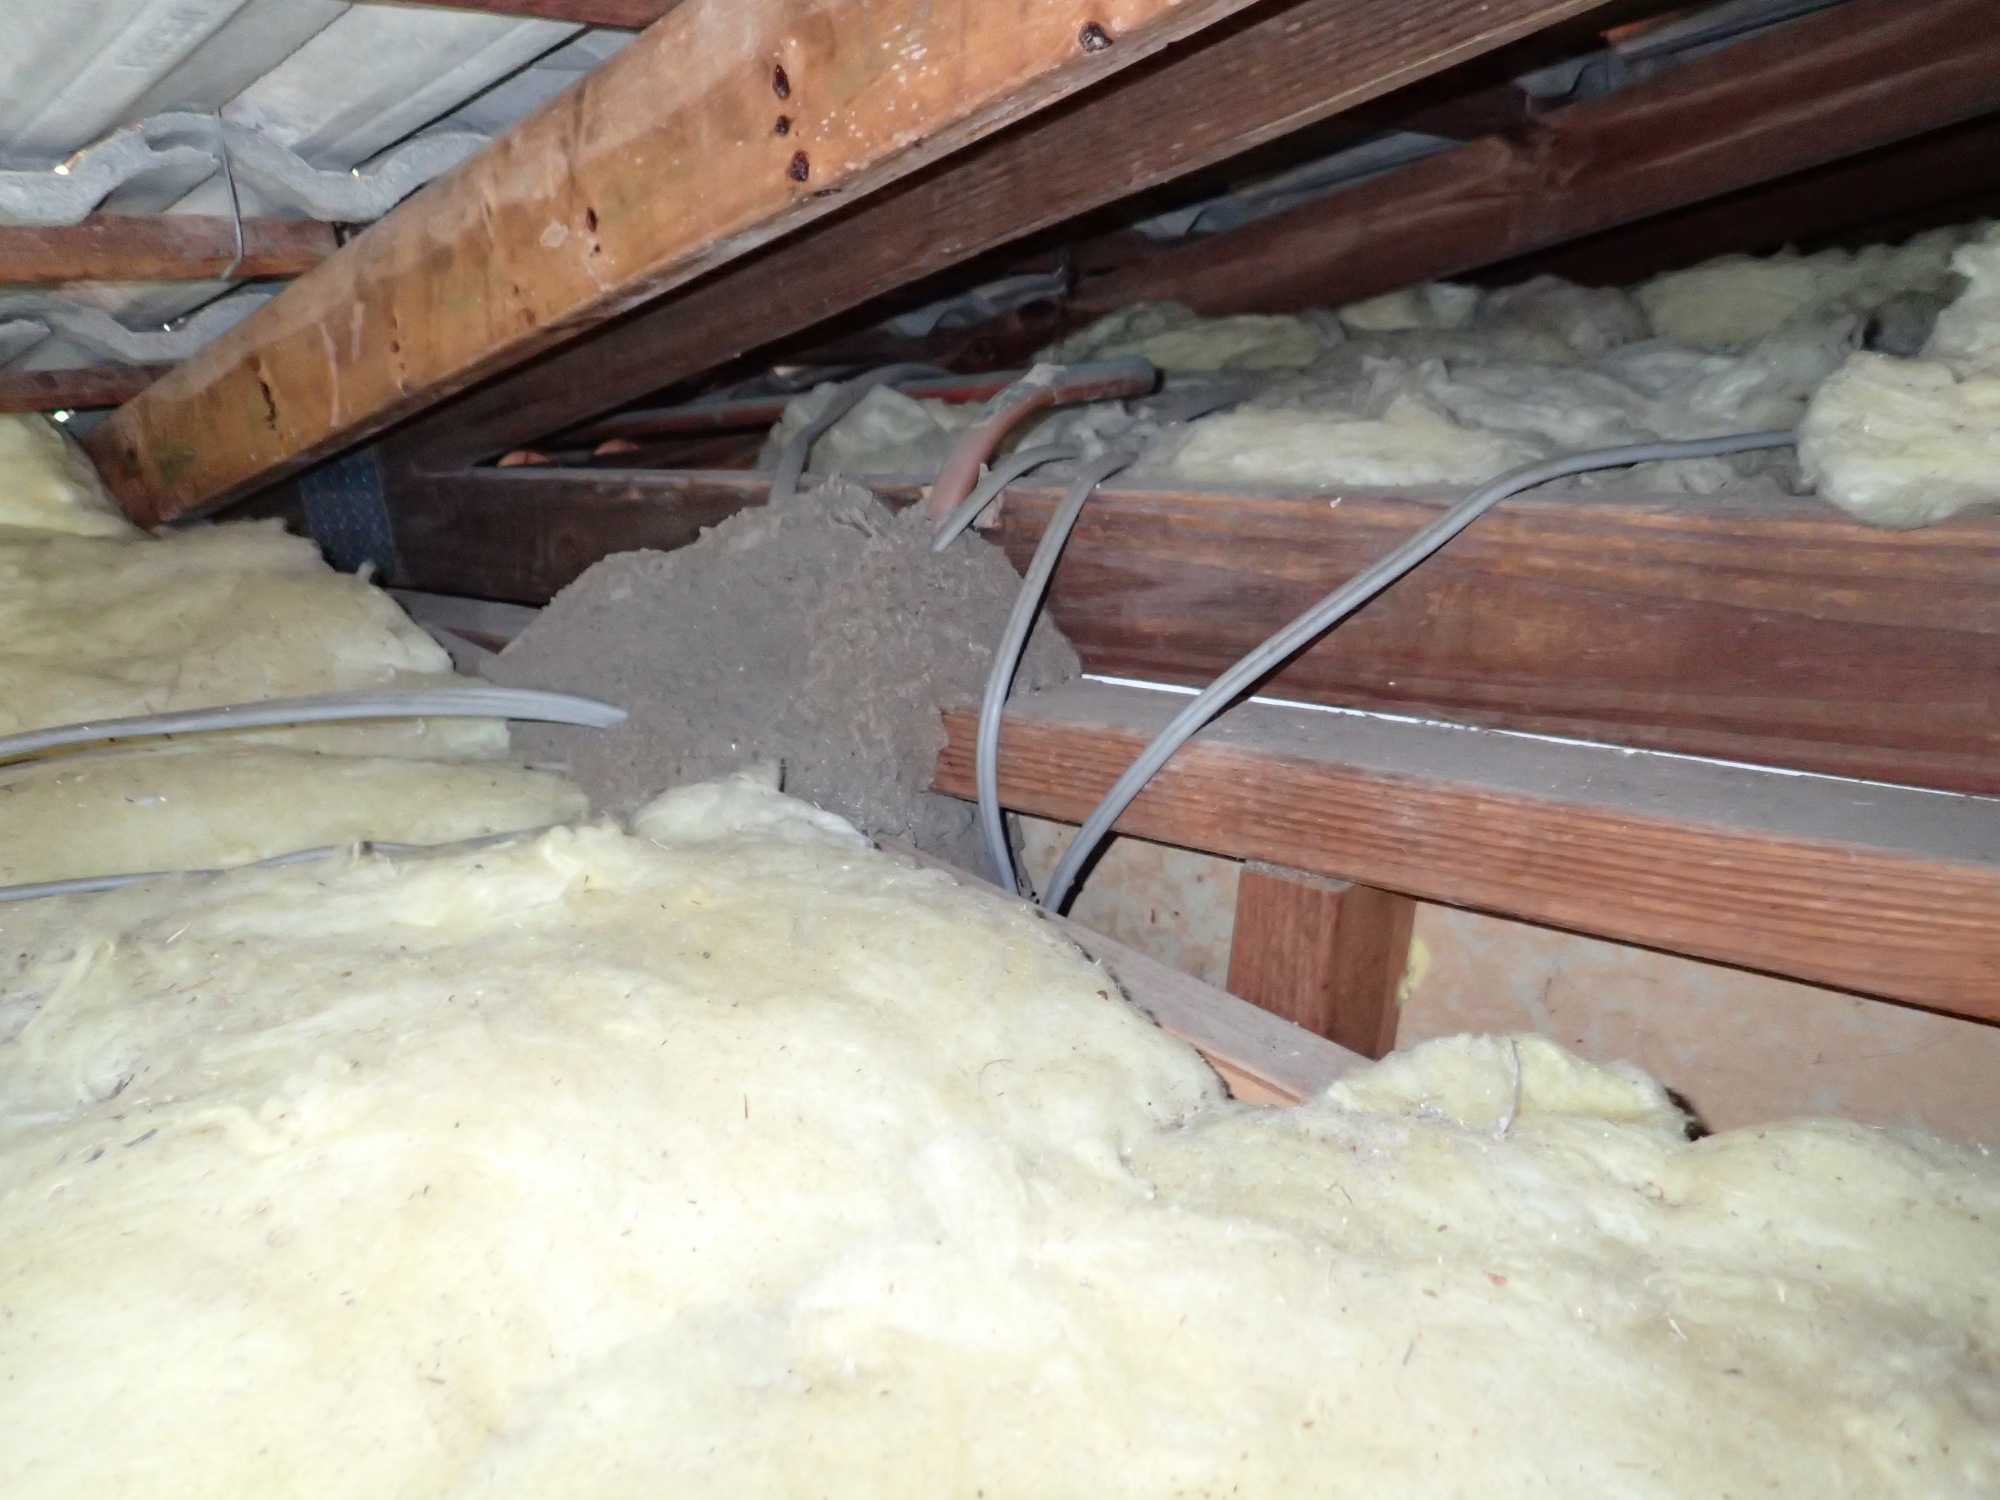 A termite nest found in a roof void today. An elderly couple had found termites in the yard and were concerned. Thankfully this is not a particularly destructive termite species